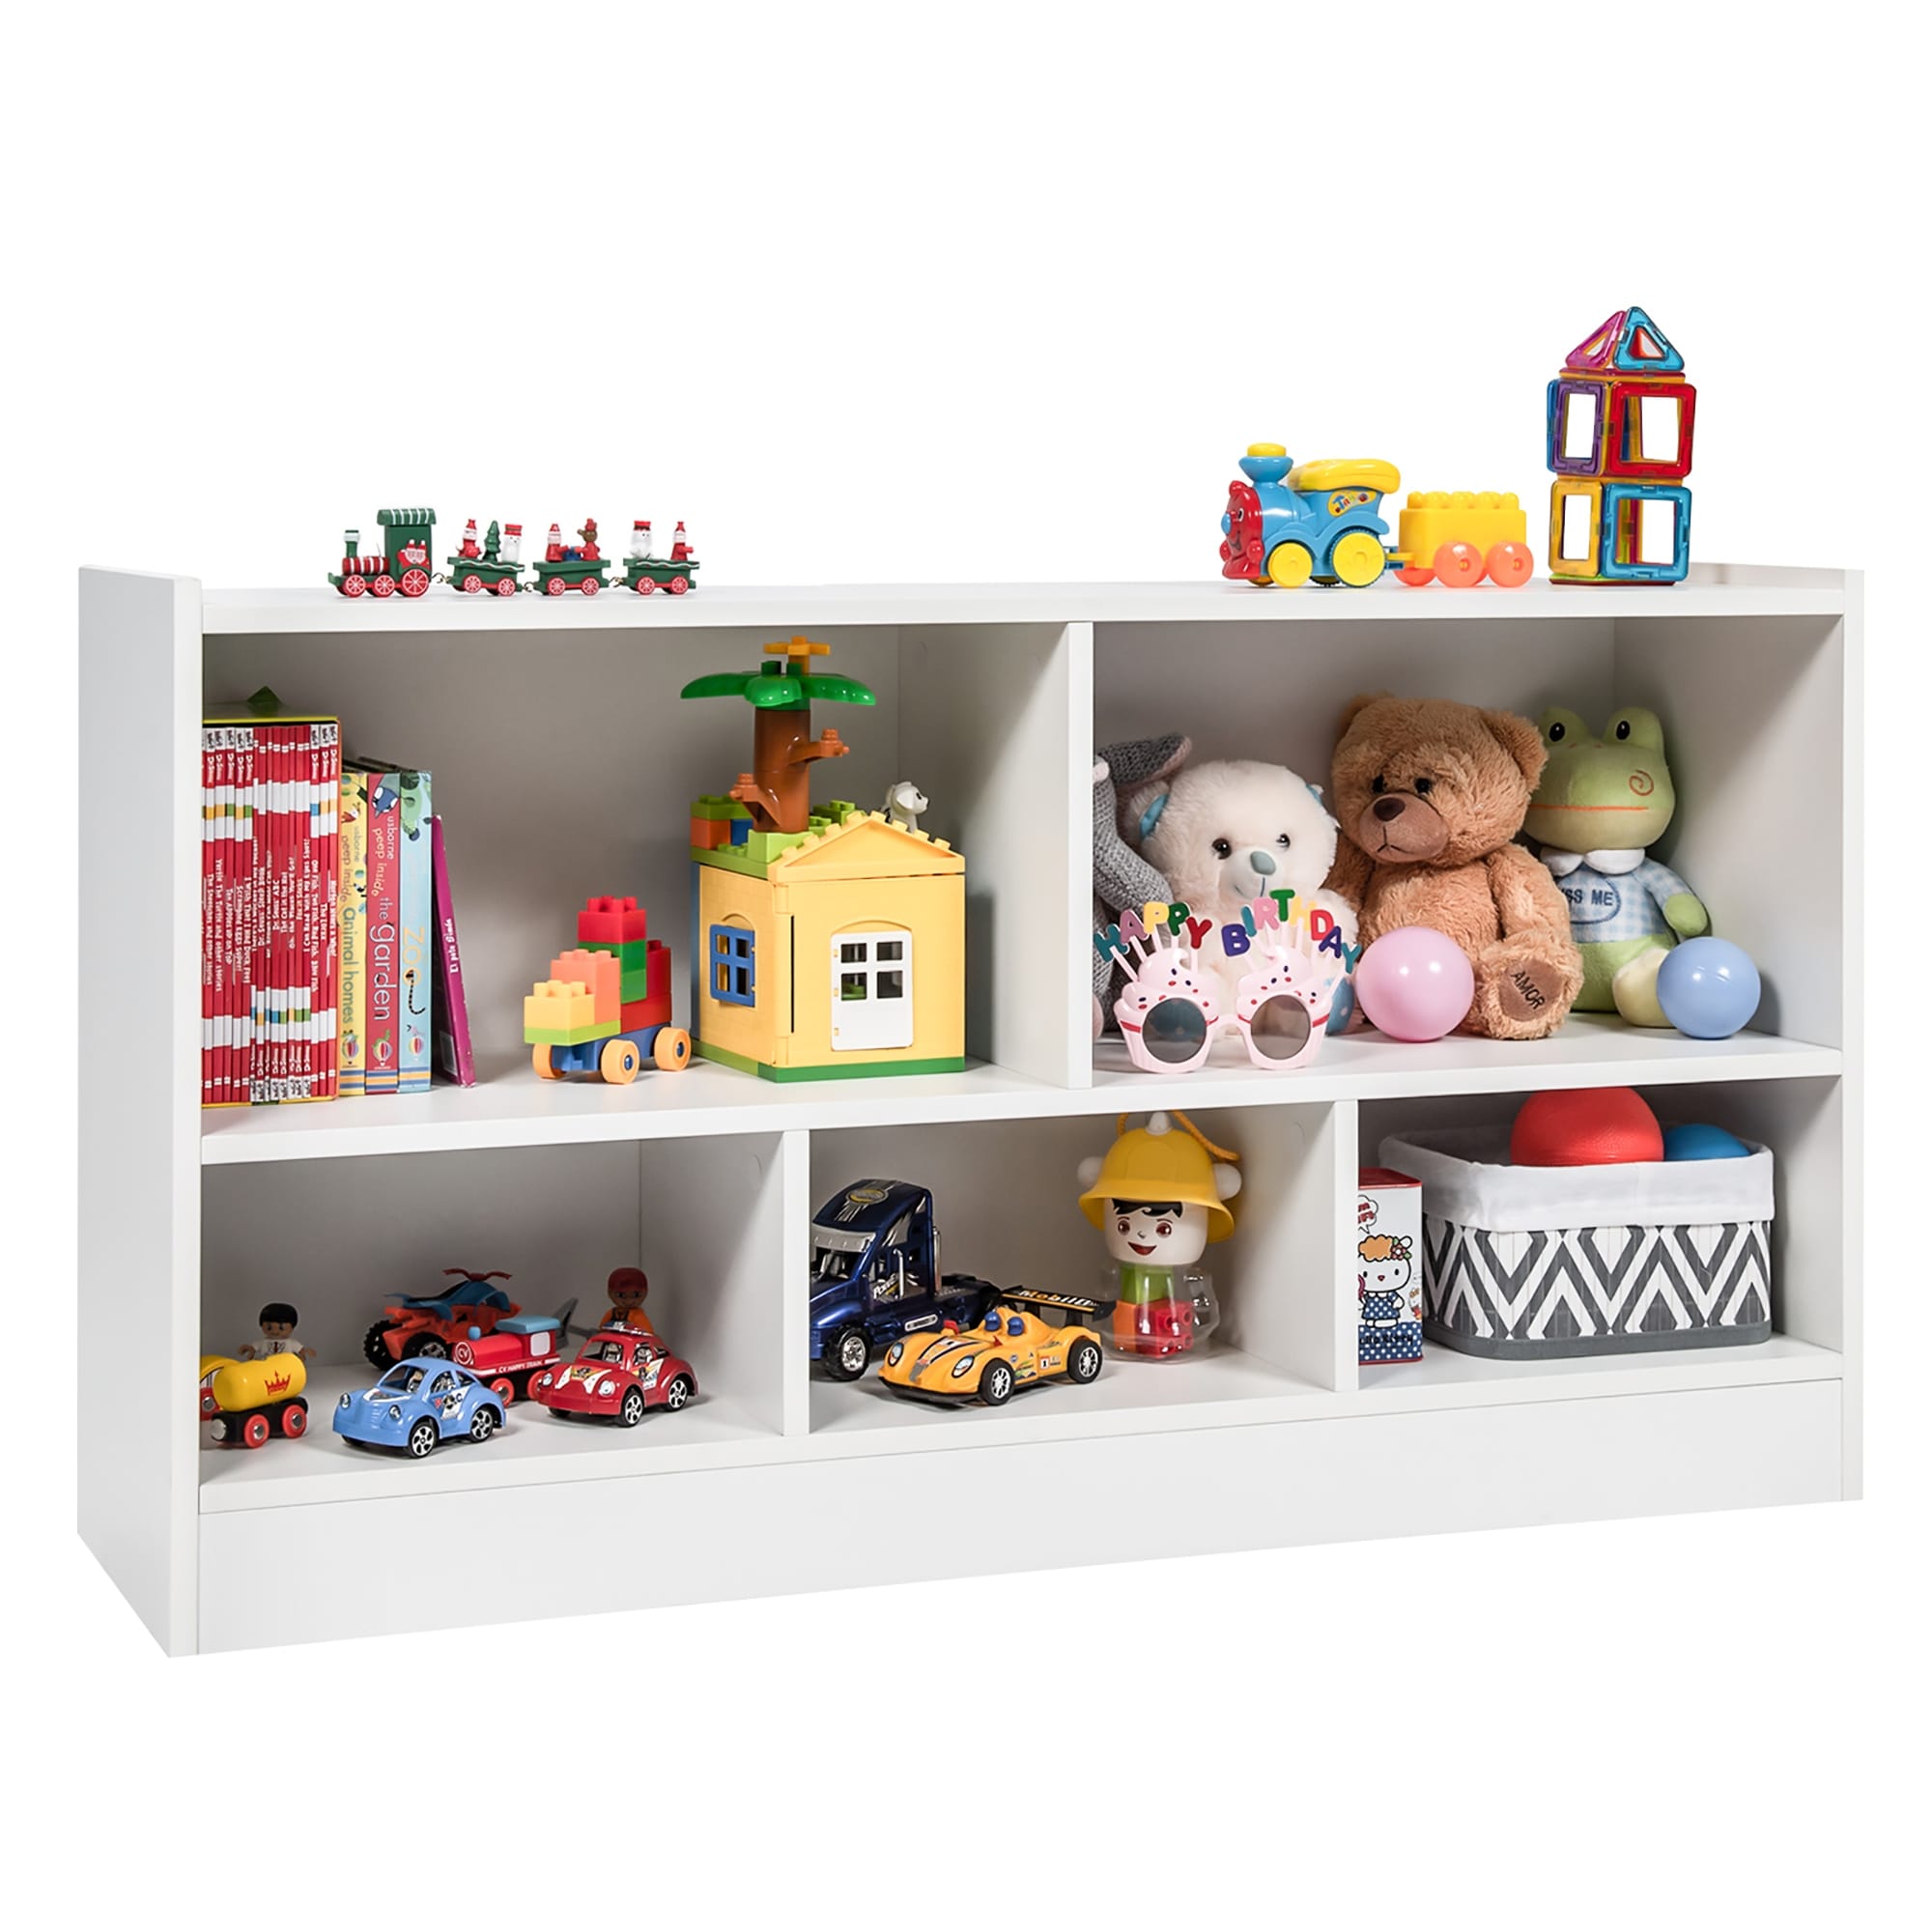 https://ak1.ostkcdn.com/images/products/is/images/direct/fe0784eeabdbb7609dd7b5ab862736752dc1a715/Costway-Kids-2-Shelf-Bookcase-5-Cube-Wood-Toy-Storage-Cabinet.jpg